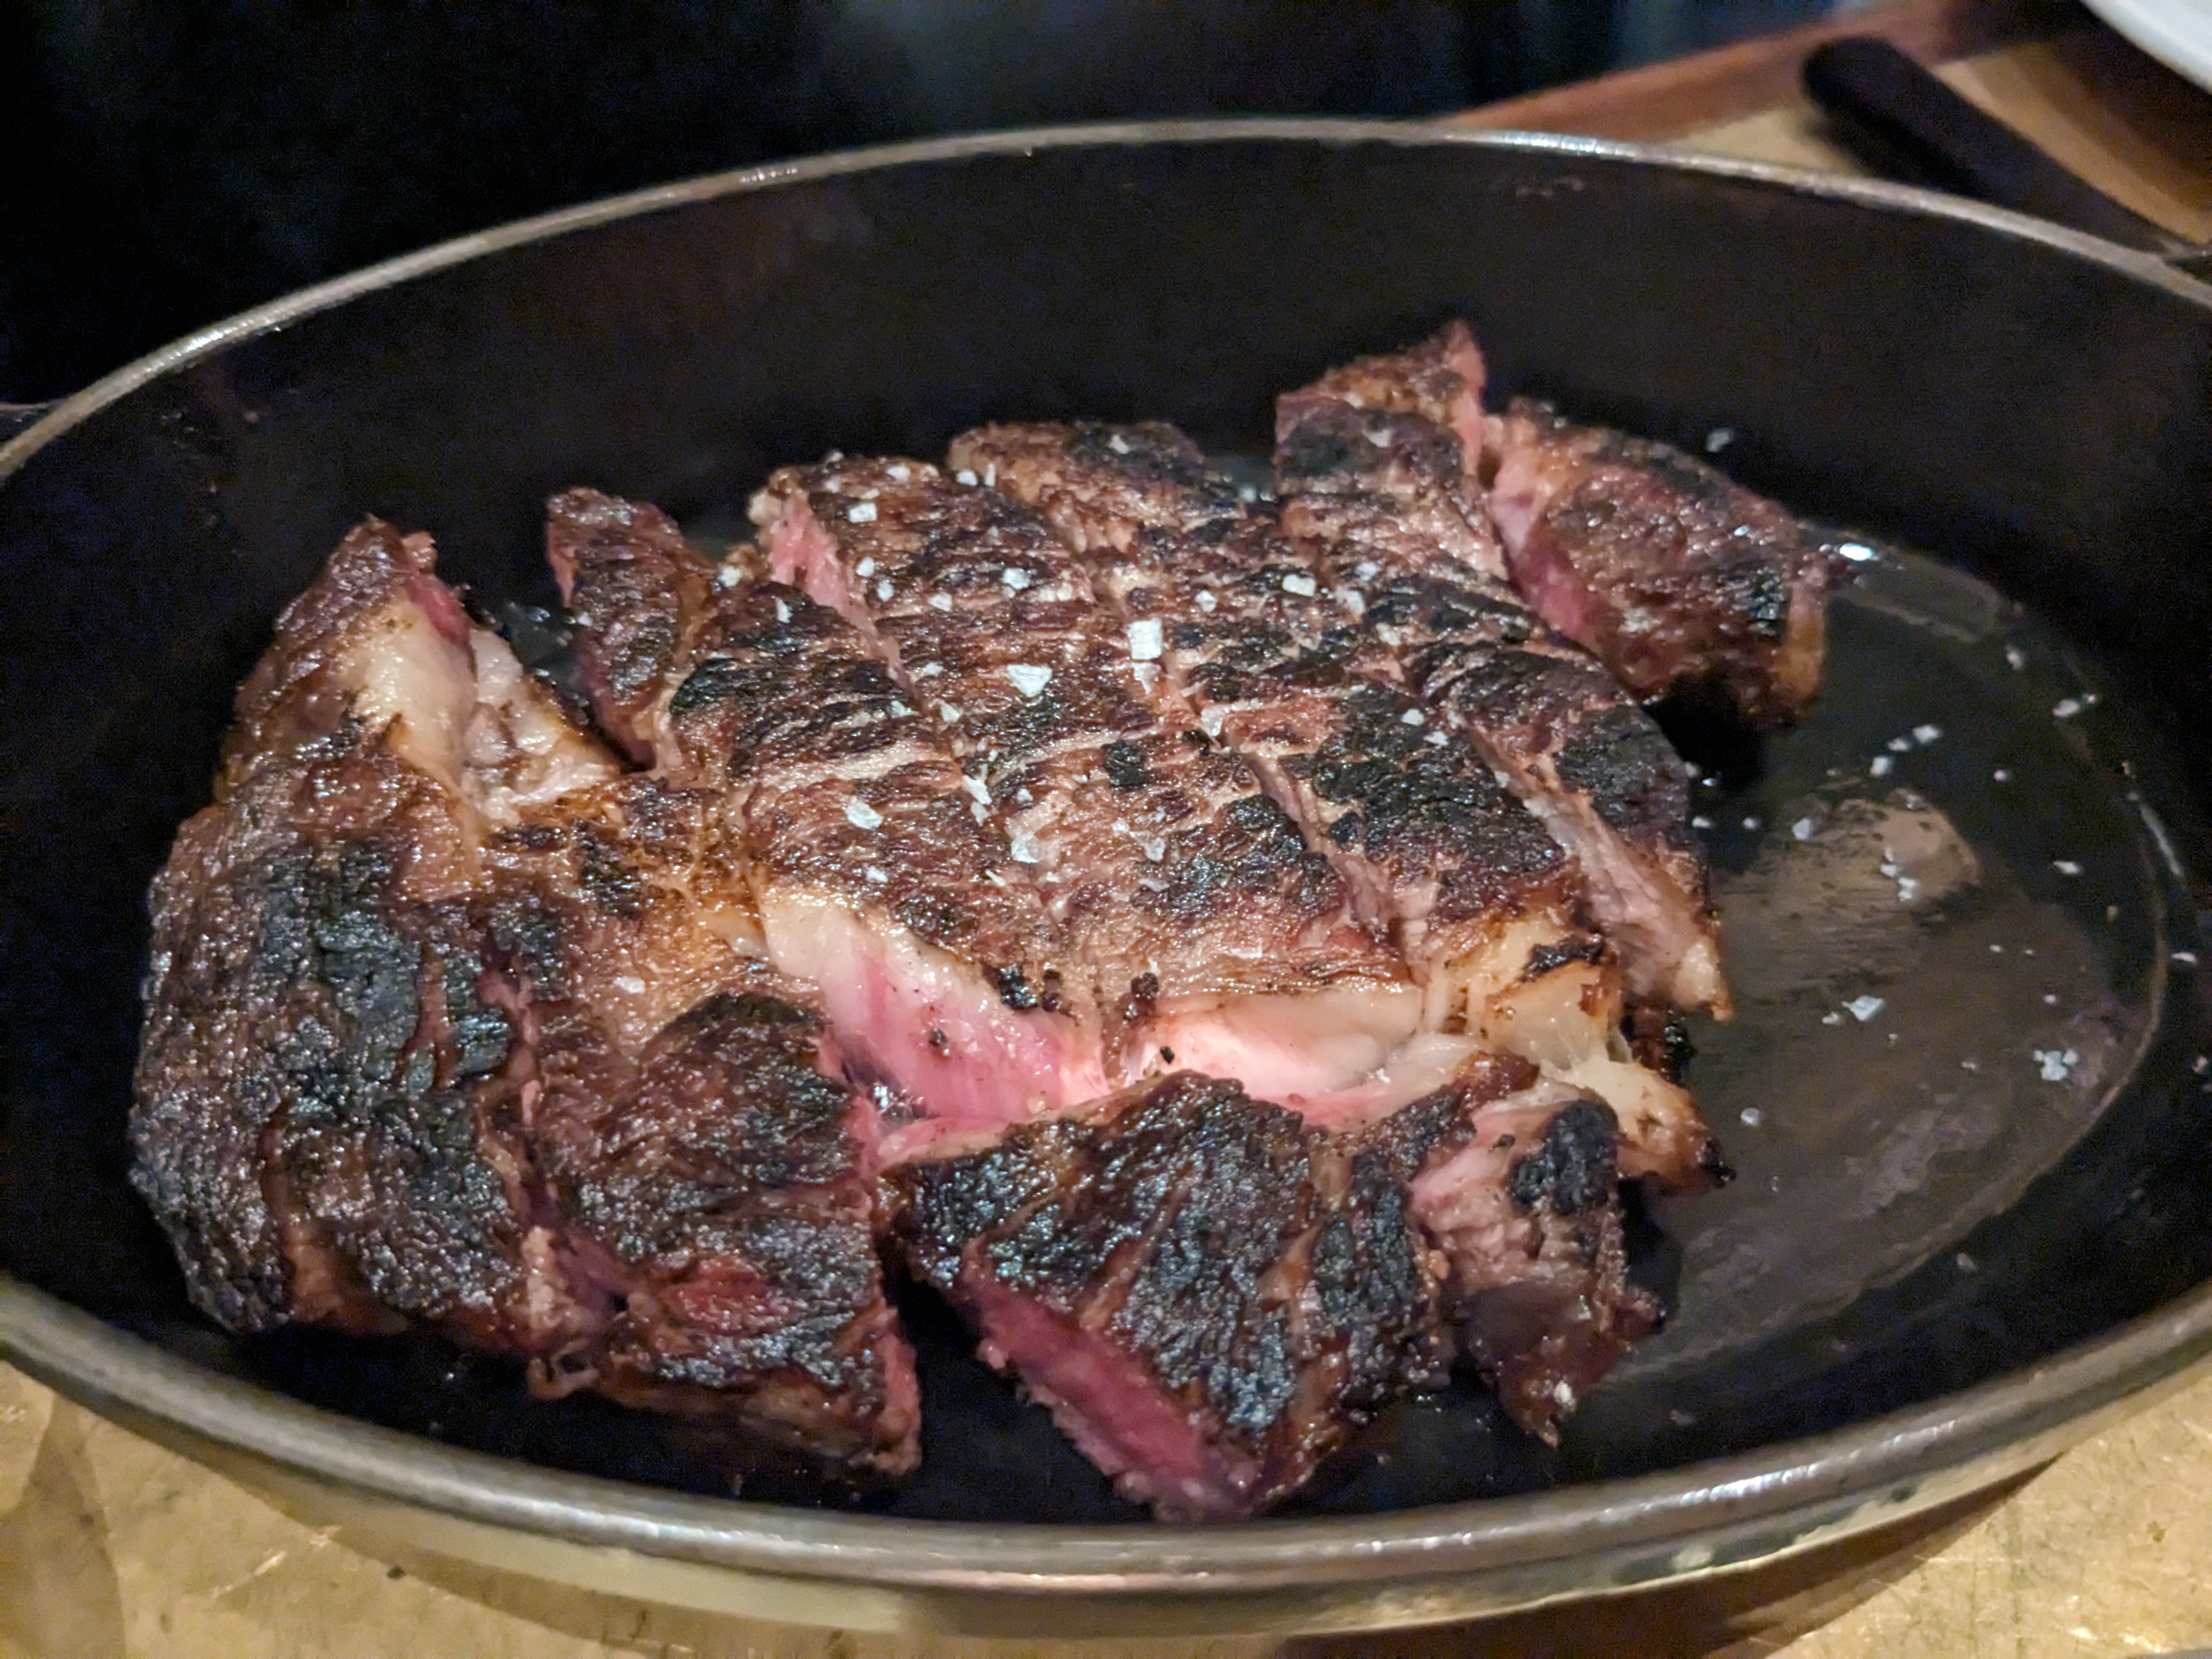 A blackened steak with a bone faintly visible.